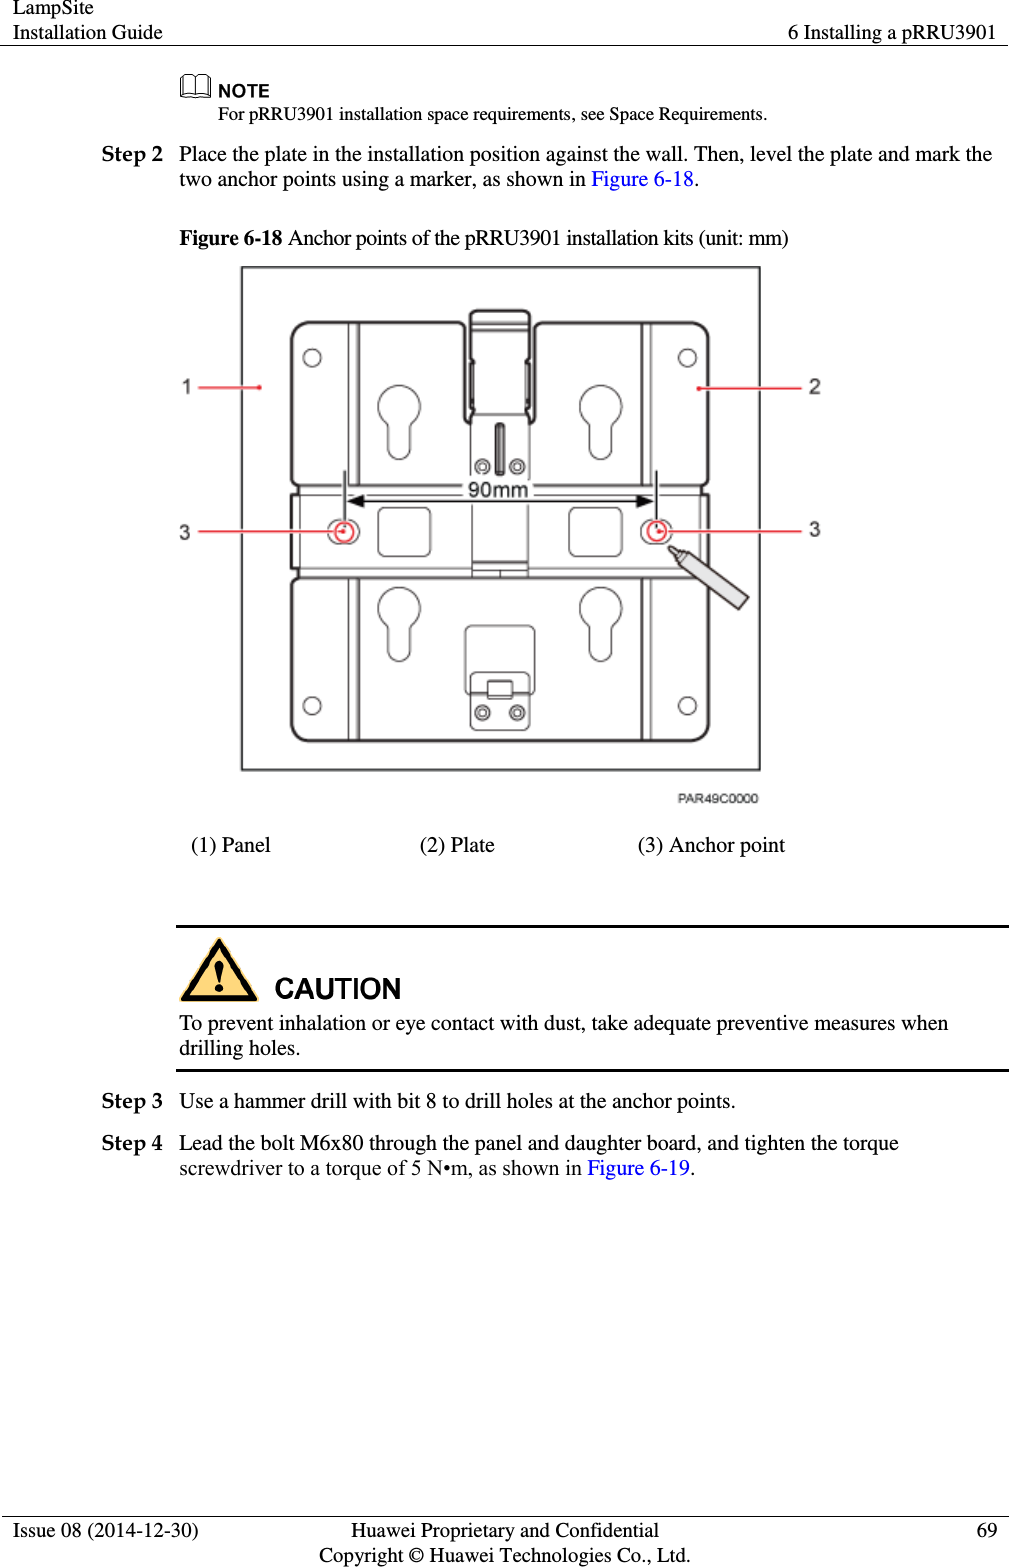 LampSite Installation Guide 6 Installing a pRRU3901  Issue 08 (2014-12-30) Huawei Proprietary and Confidential                                     Copyright © Huawei Technologies Co., Ltd. 69   For pRRU3901 installation space requirements, see Space Requirements. Step 2 Place the plate in the installation position against the wall. Then, level the plate and mark the two anchor points using a marker, as shown in Figure 6-18. Figure 6-18 Anchor points of the pRRU3901 installation kits (unit: mm)  (1) Panel (2) Plate (3) Anchor point   To prevent inhalation or eye contact with dust, take adequate preventive measures when drilling holes.   Step 3 Use a hammer drill with bit 8 to drill holes at the anchor points. Step 4 Lead the bolt M6x80 through the panel and daughter board, and tighten the torque screwdriver to a torque of 5 N•m, as shown in Figure 6-19. 